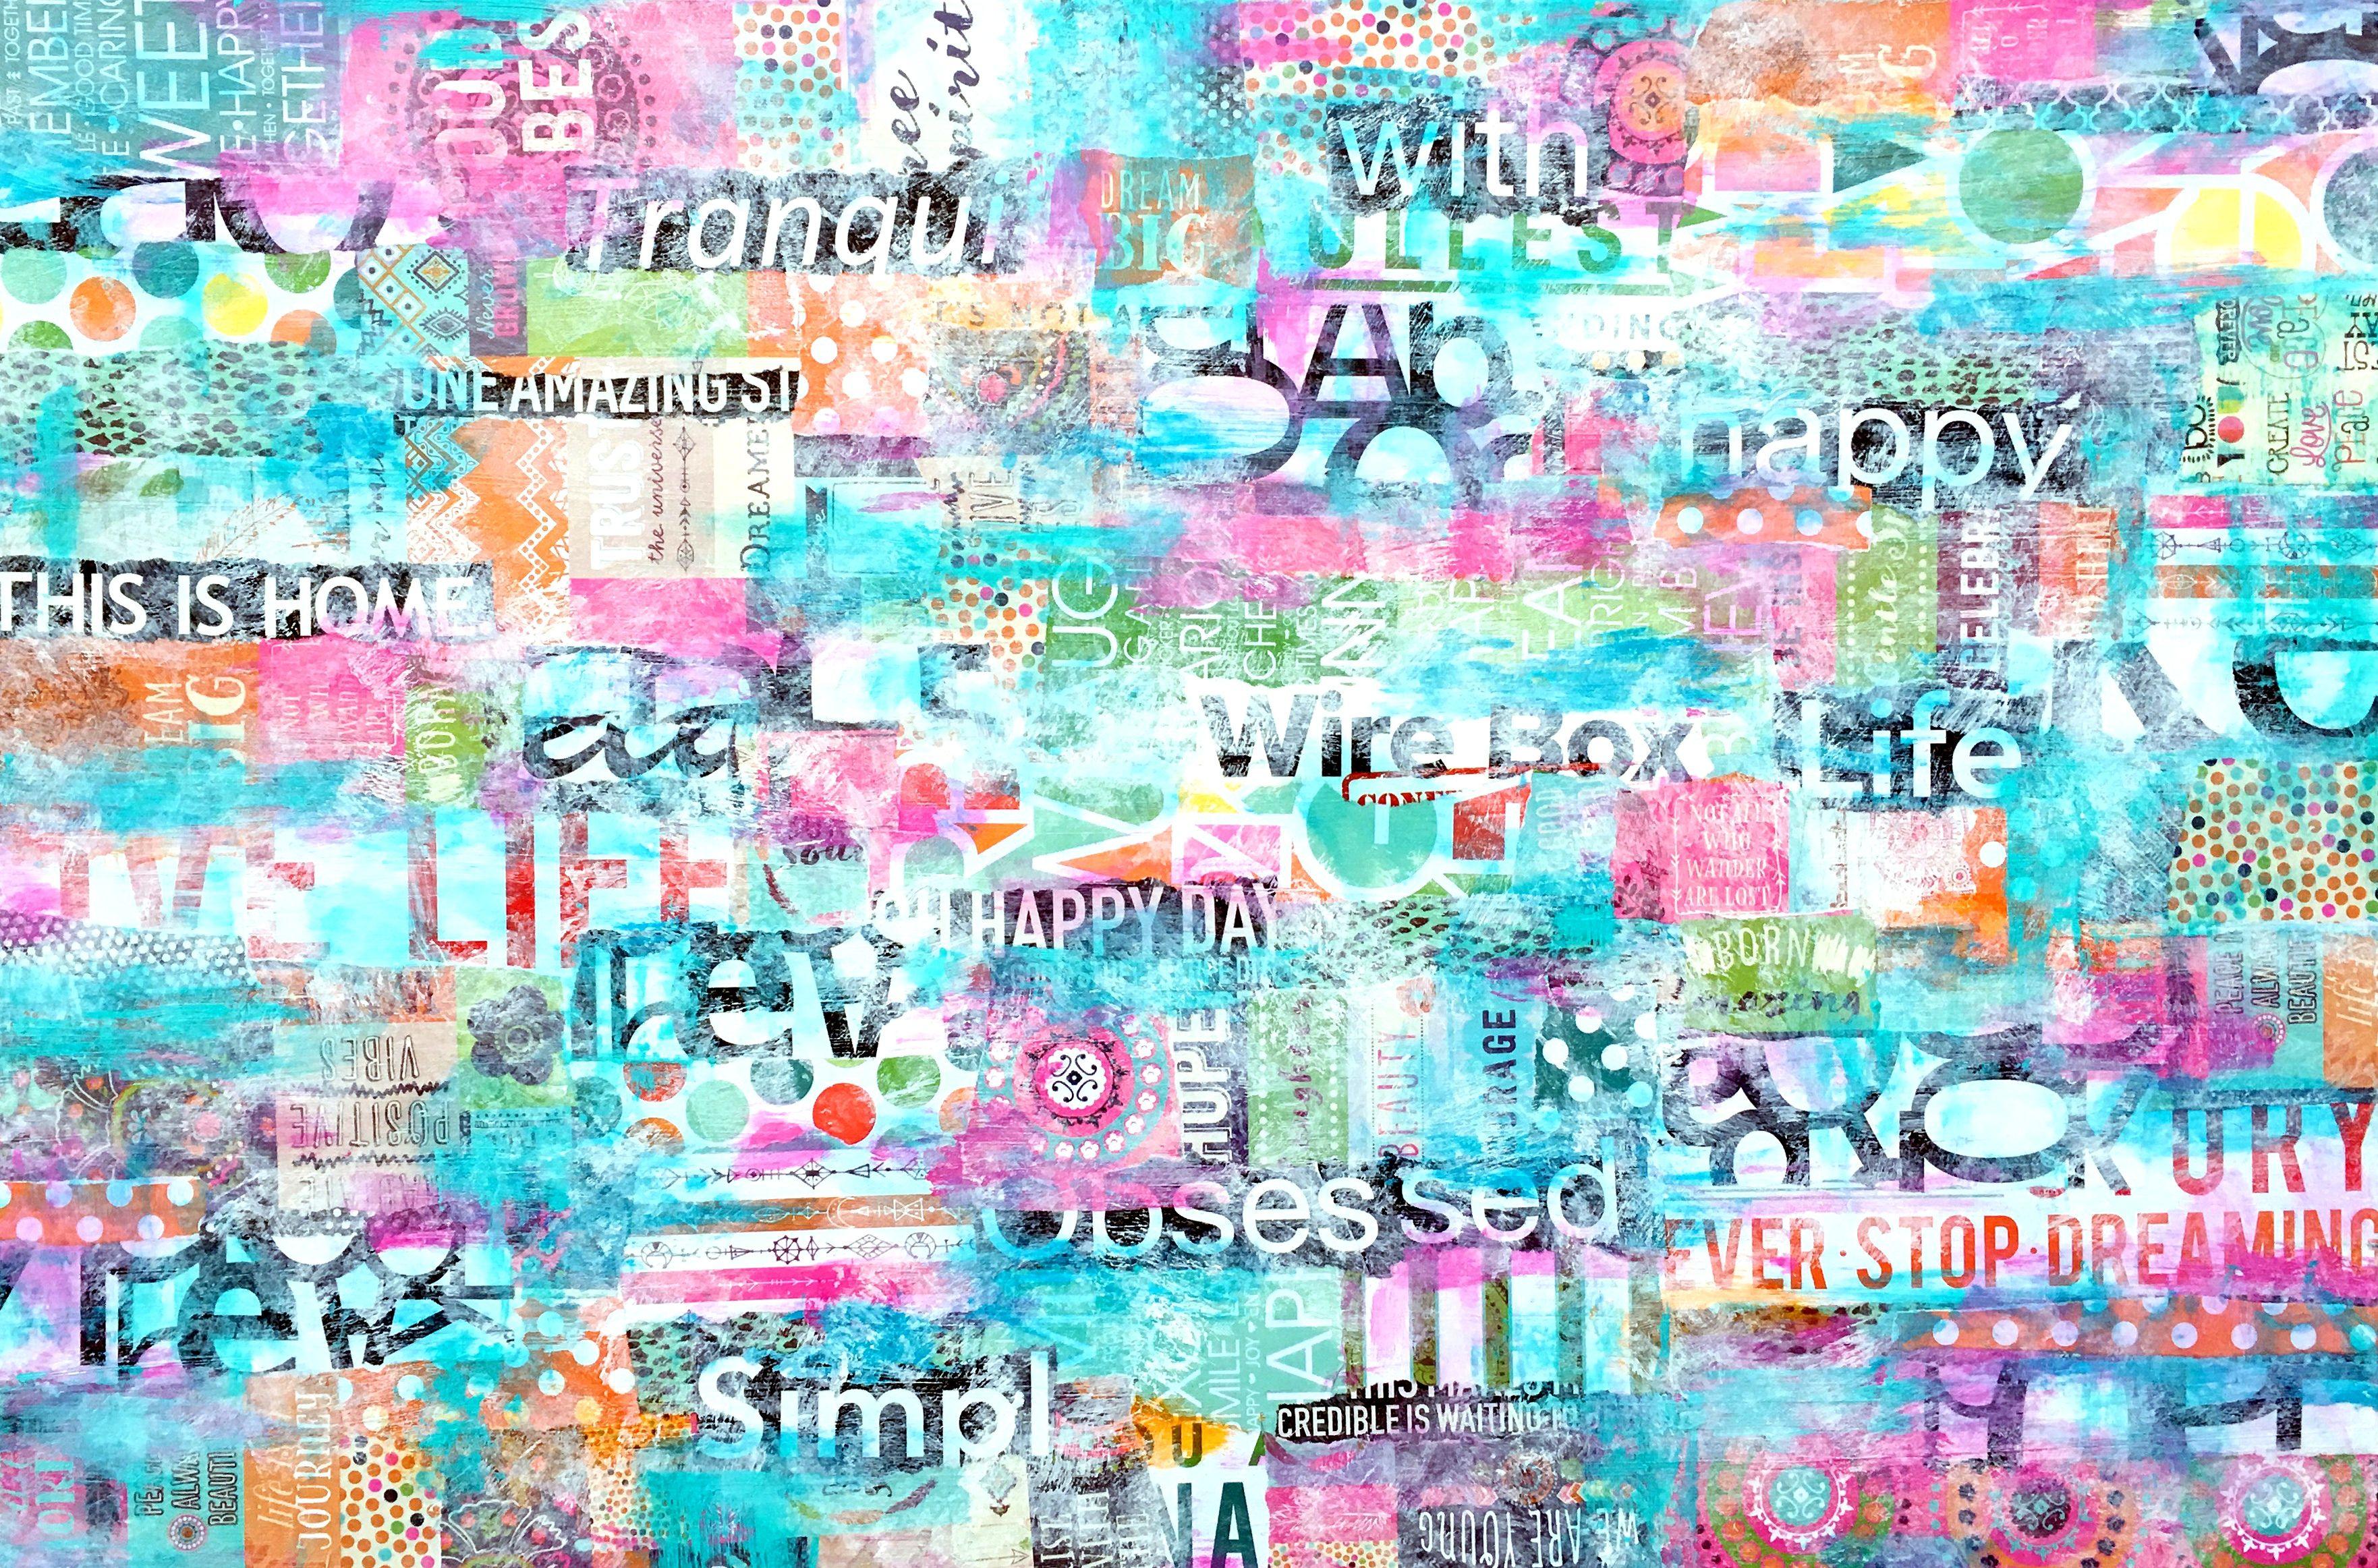 Simply Obsessed, Mixed Media on Canvas - Mixed Media Art by Robin Jorgensen